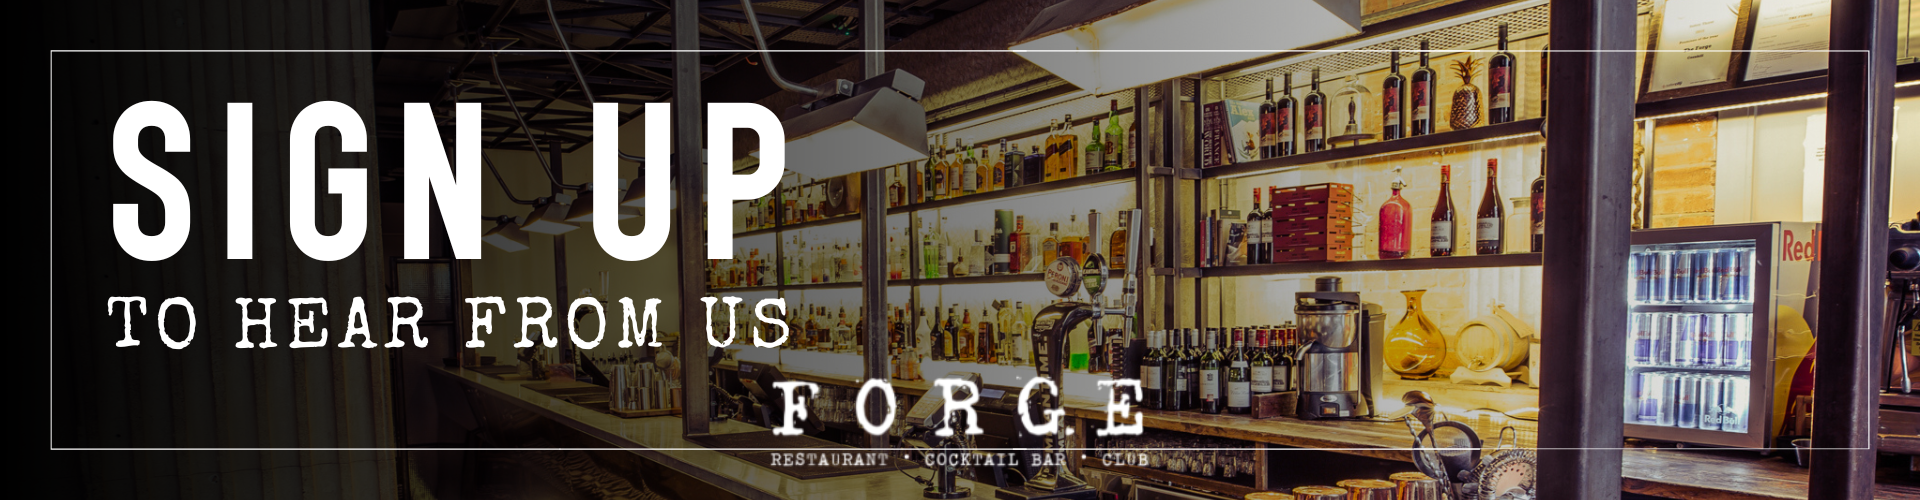 Sign up to hear from us at Forge London